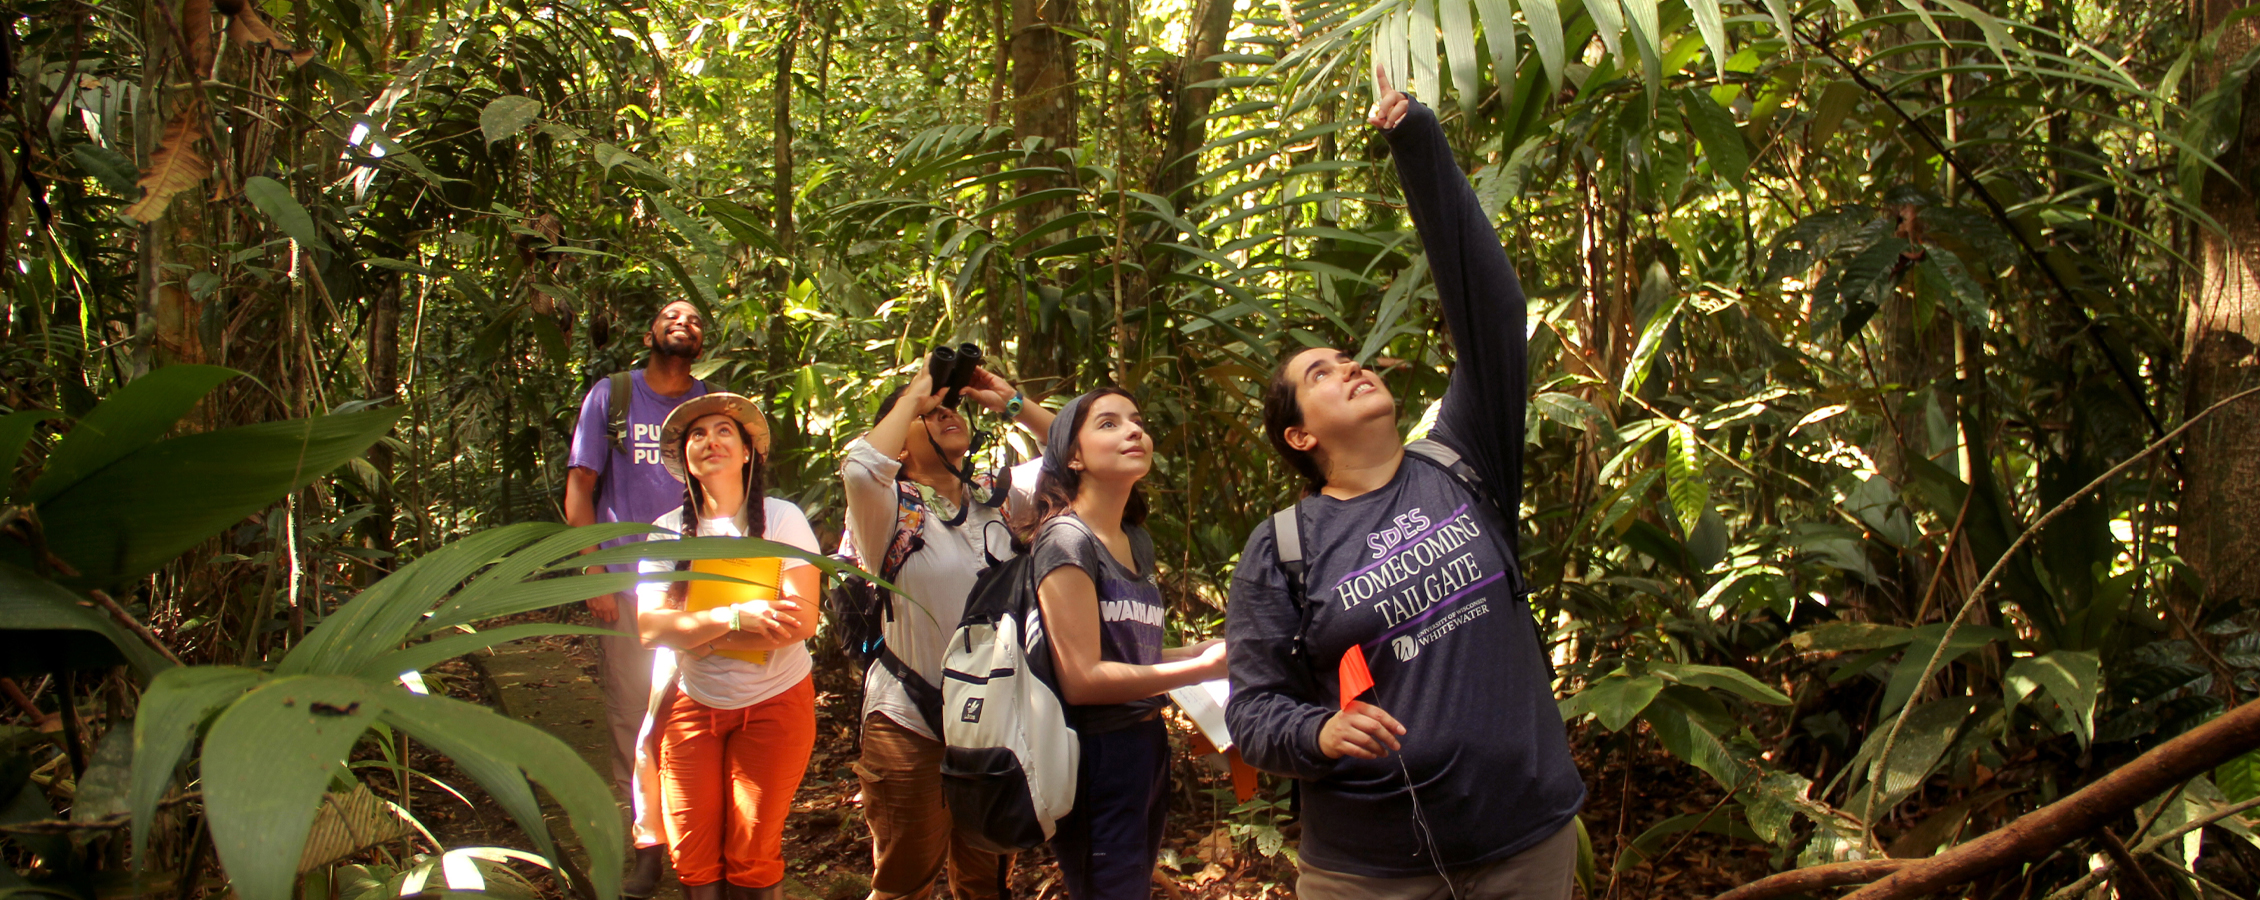 Students and a faculty member walk through the jungle in Costa Rica.